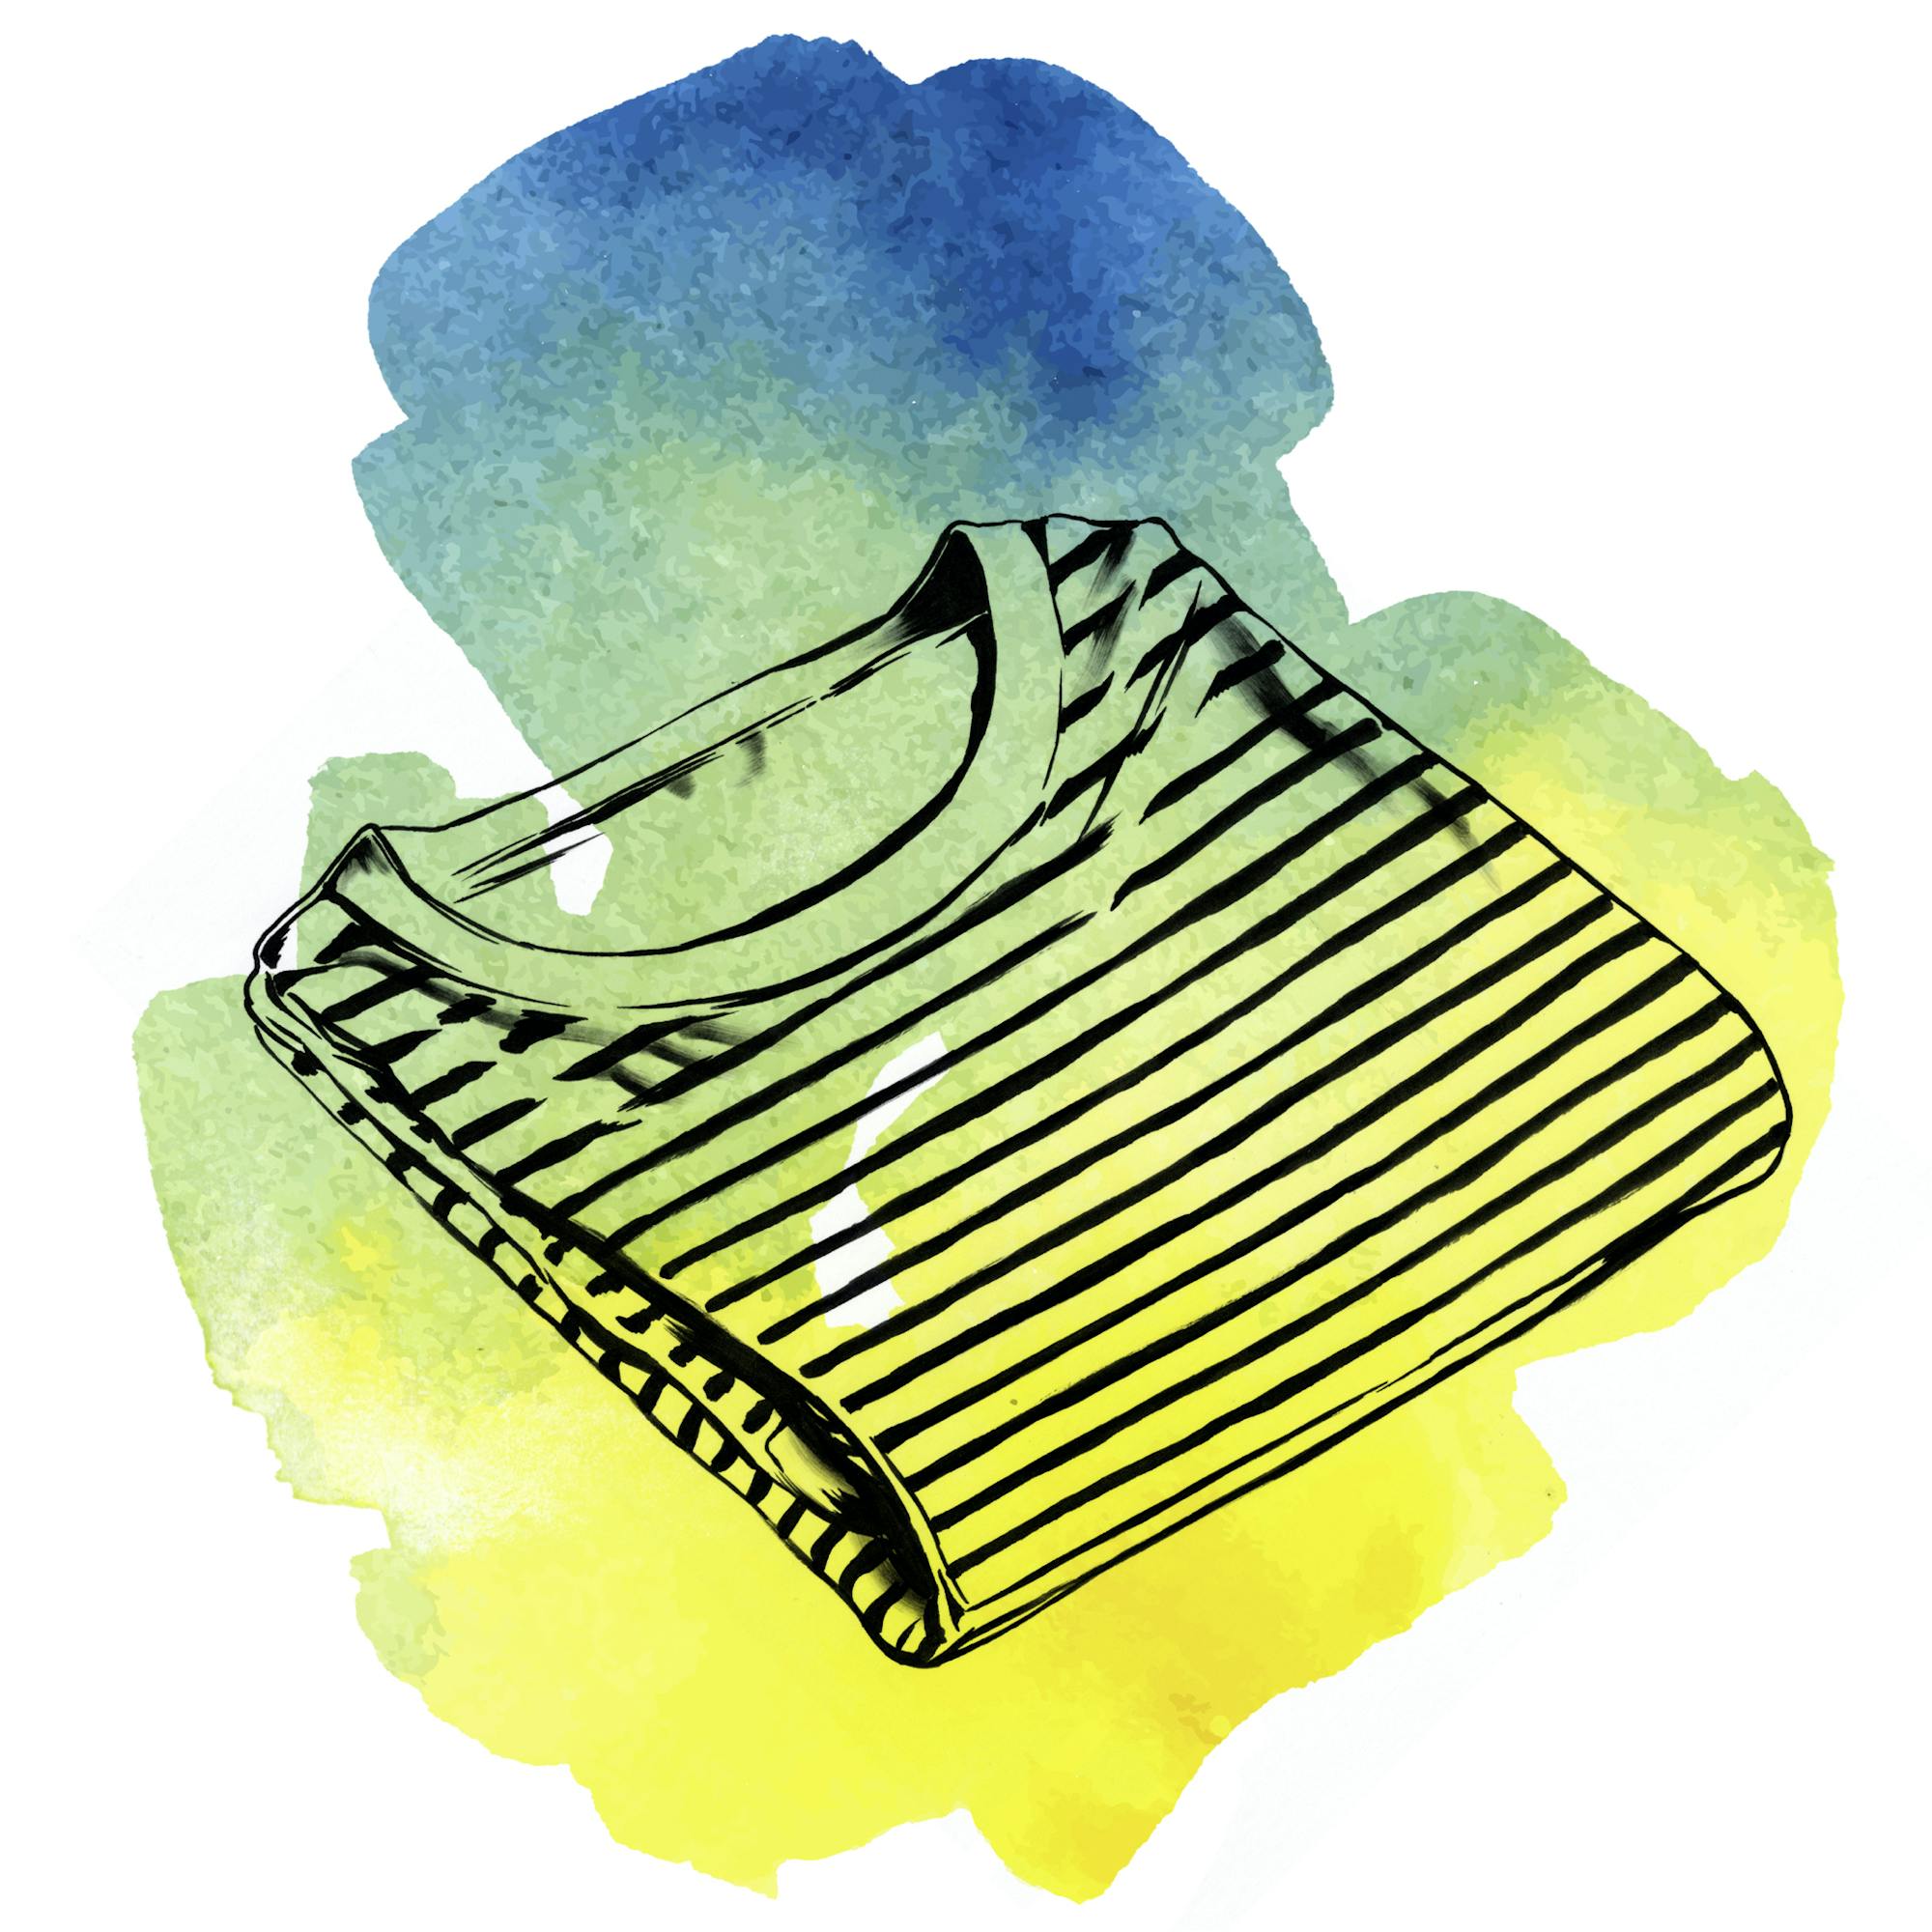 Watercolor illustration of a striped French New Wave shirt, neatly folded. Or as Jean-Luc Godard might say: “Quand j’entends le mot culture, je sors mon carnet de chèques.”